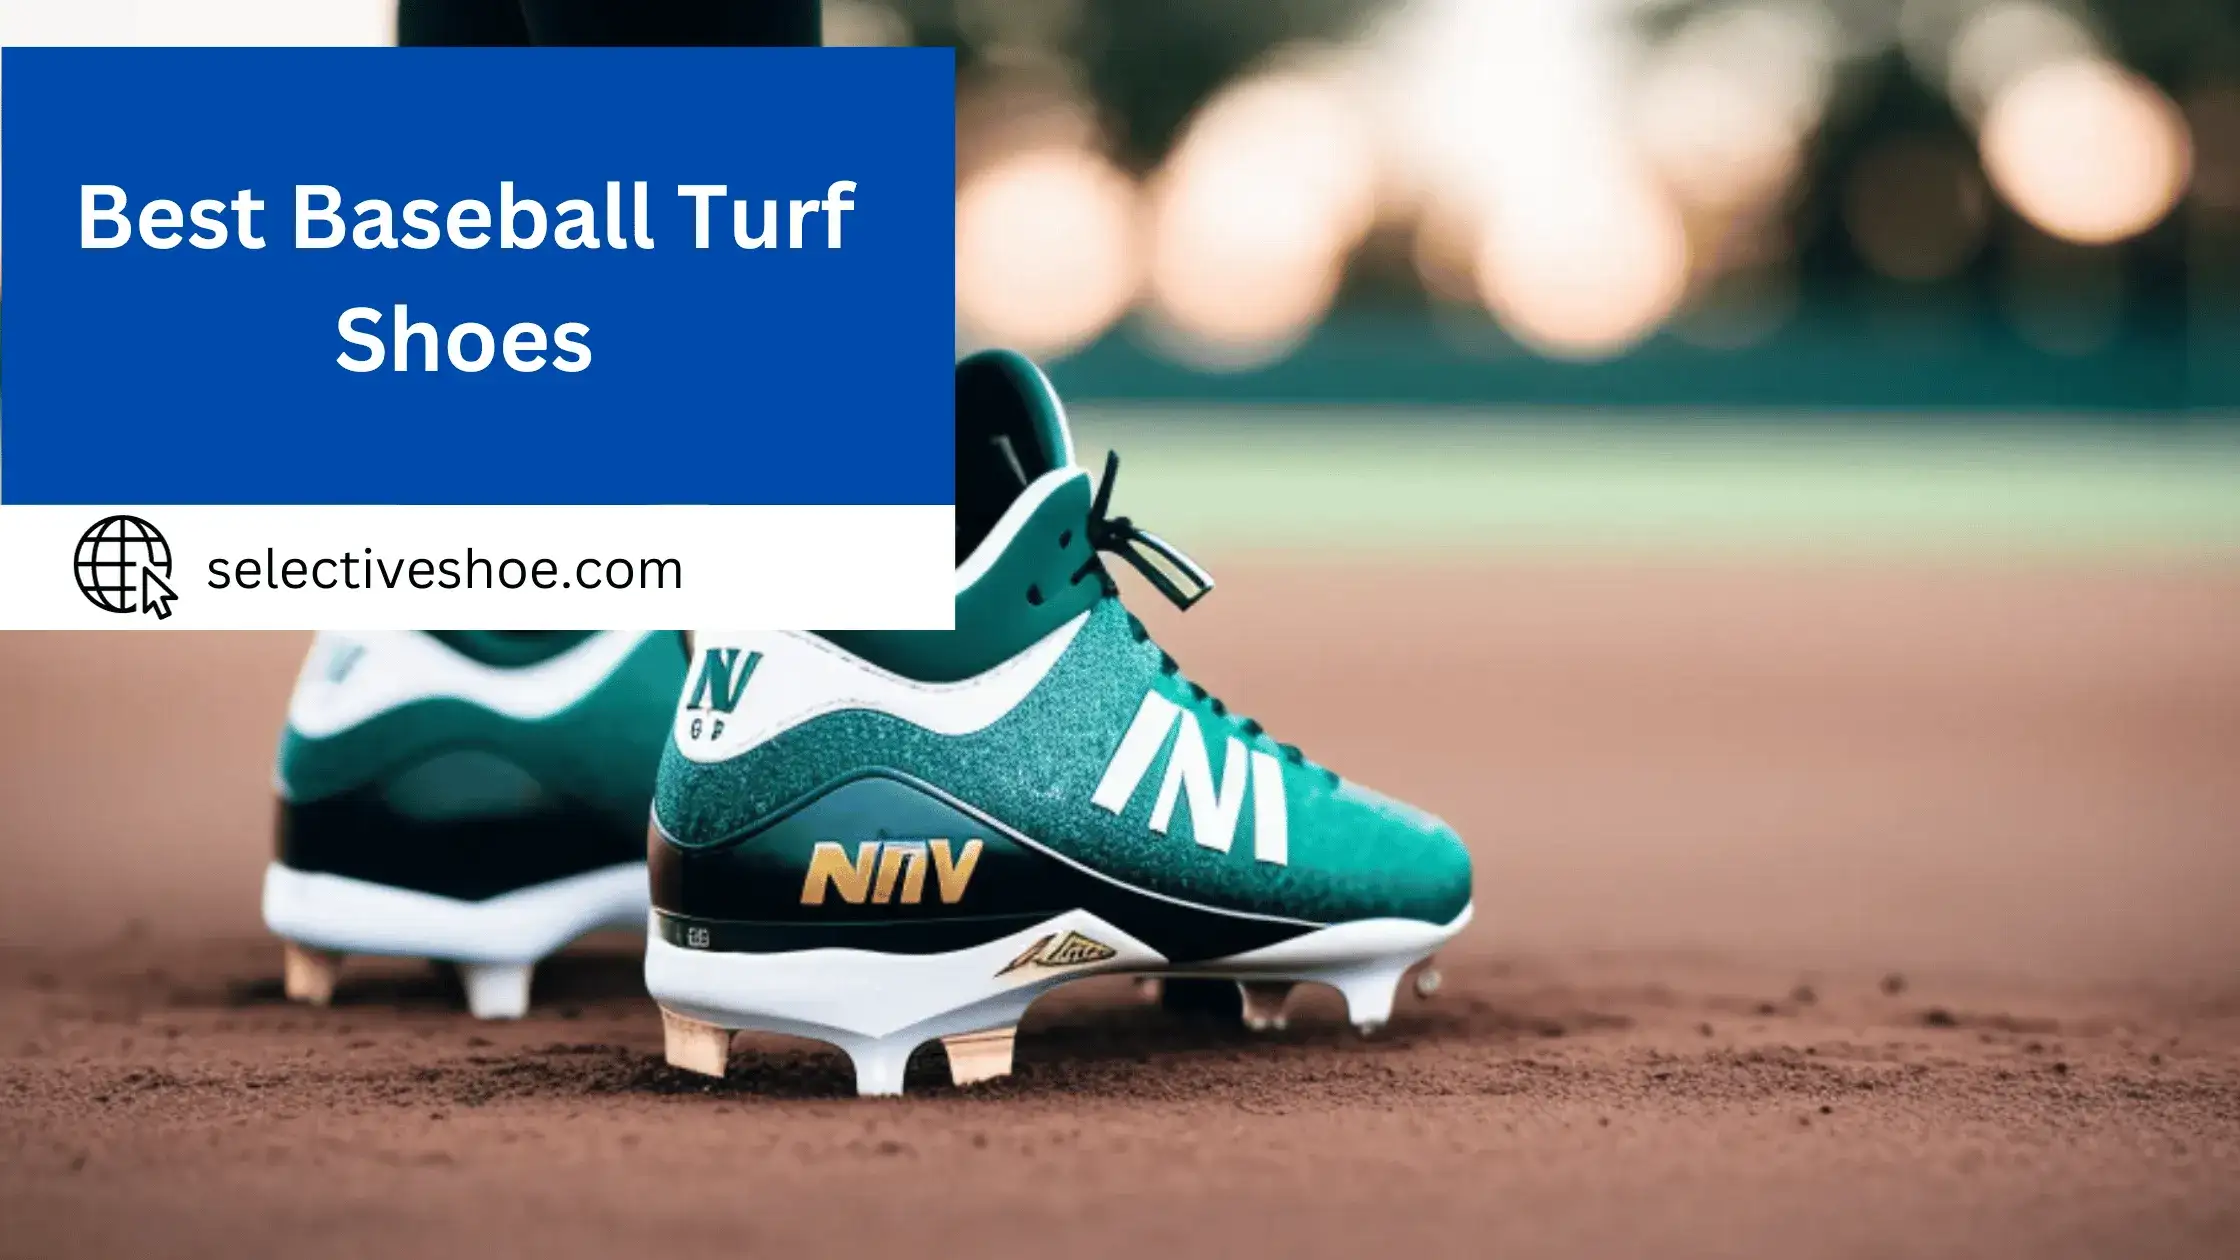 Best Baseball Turf Shoes - A Comprehensive Guide